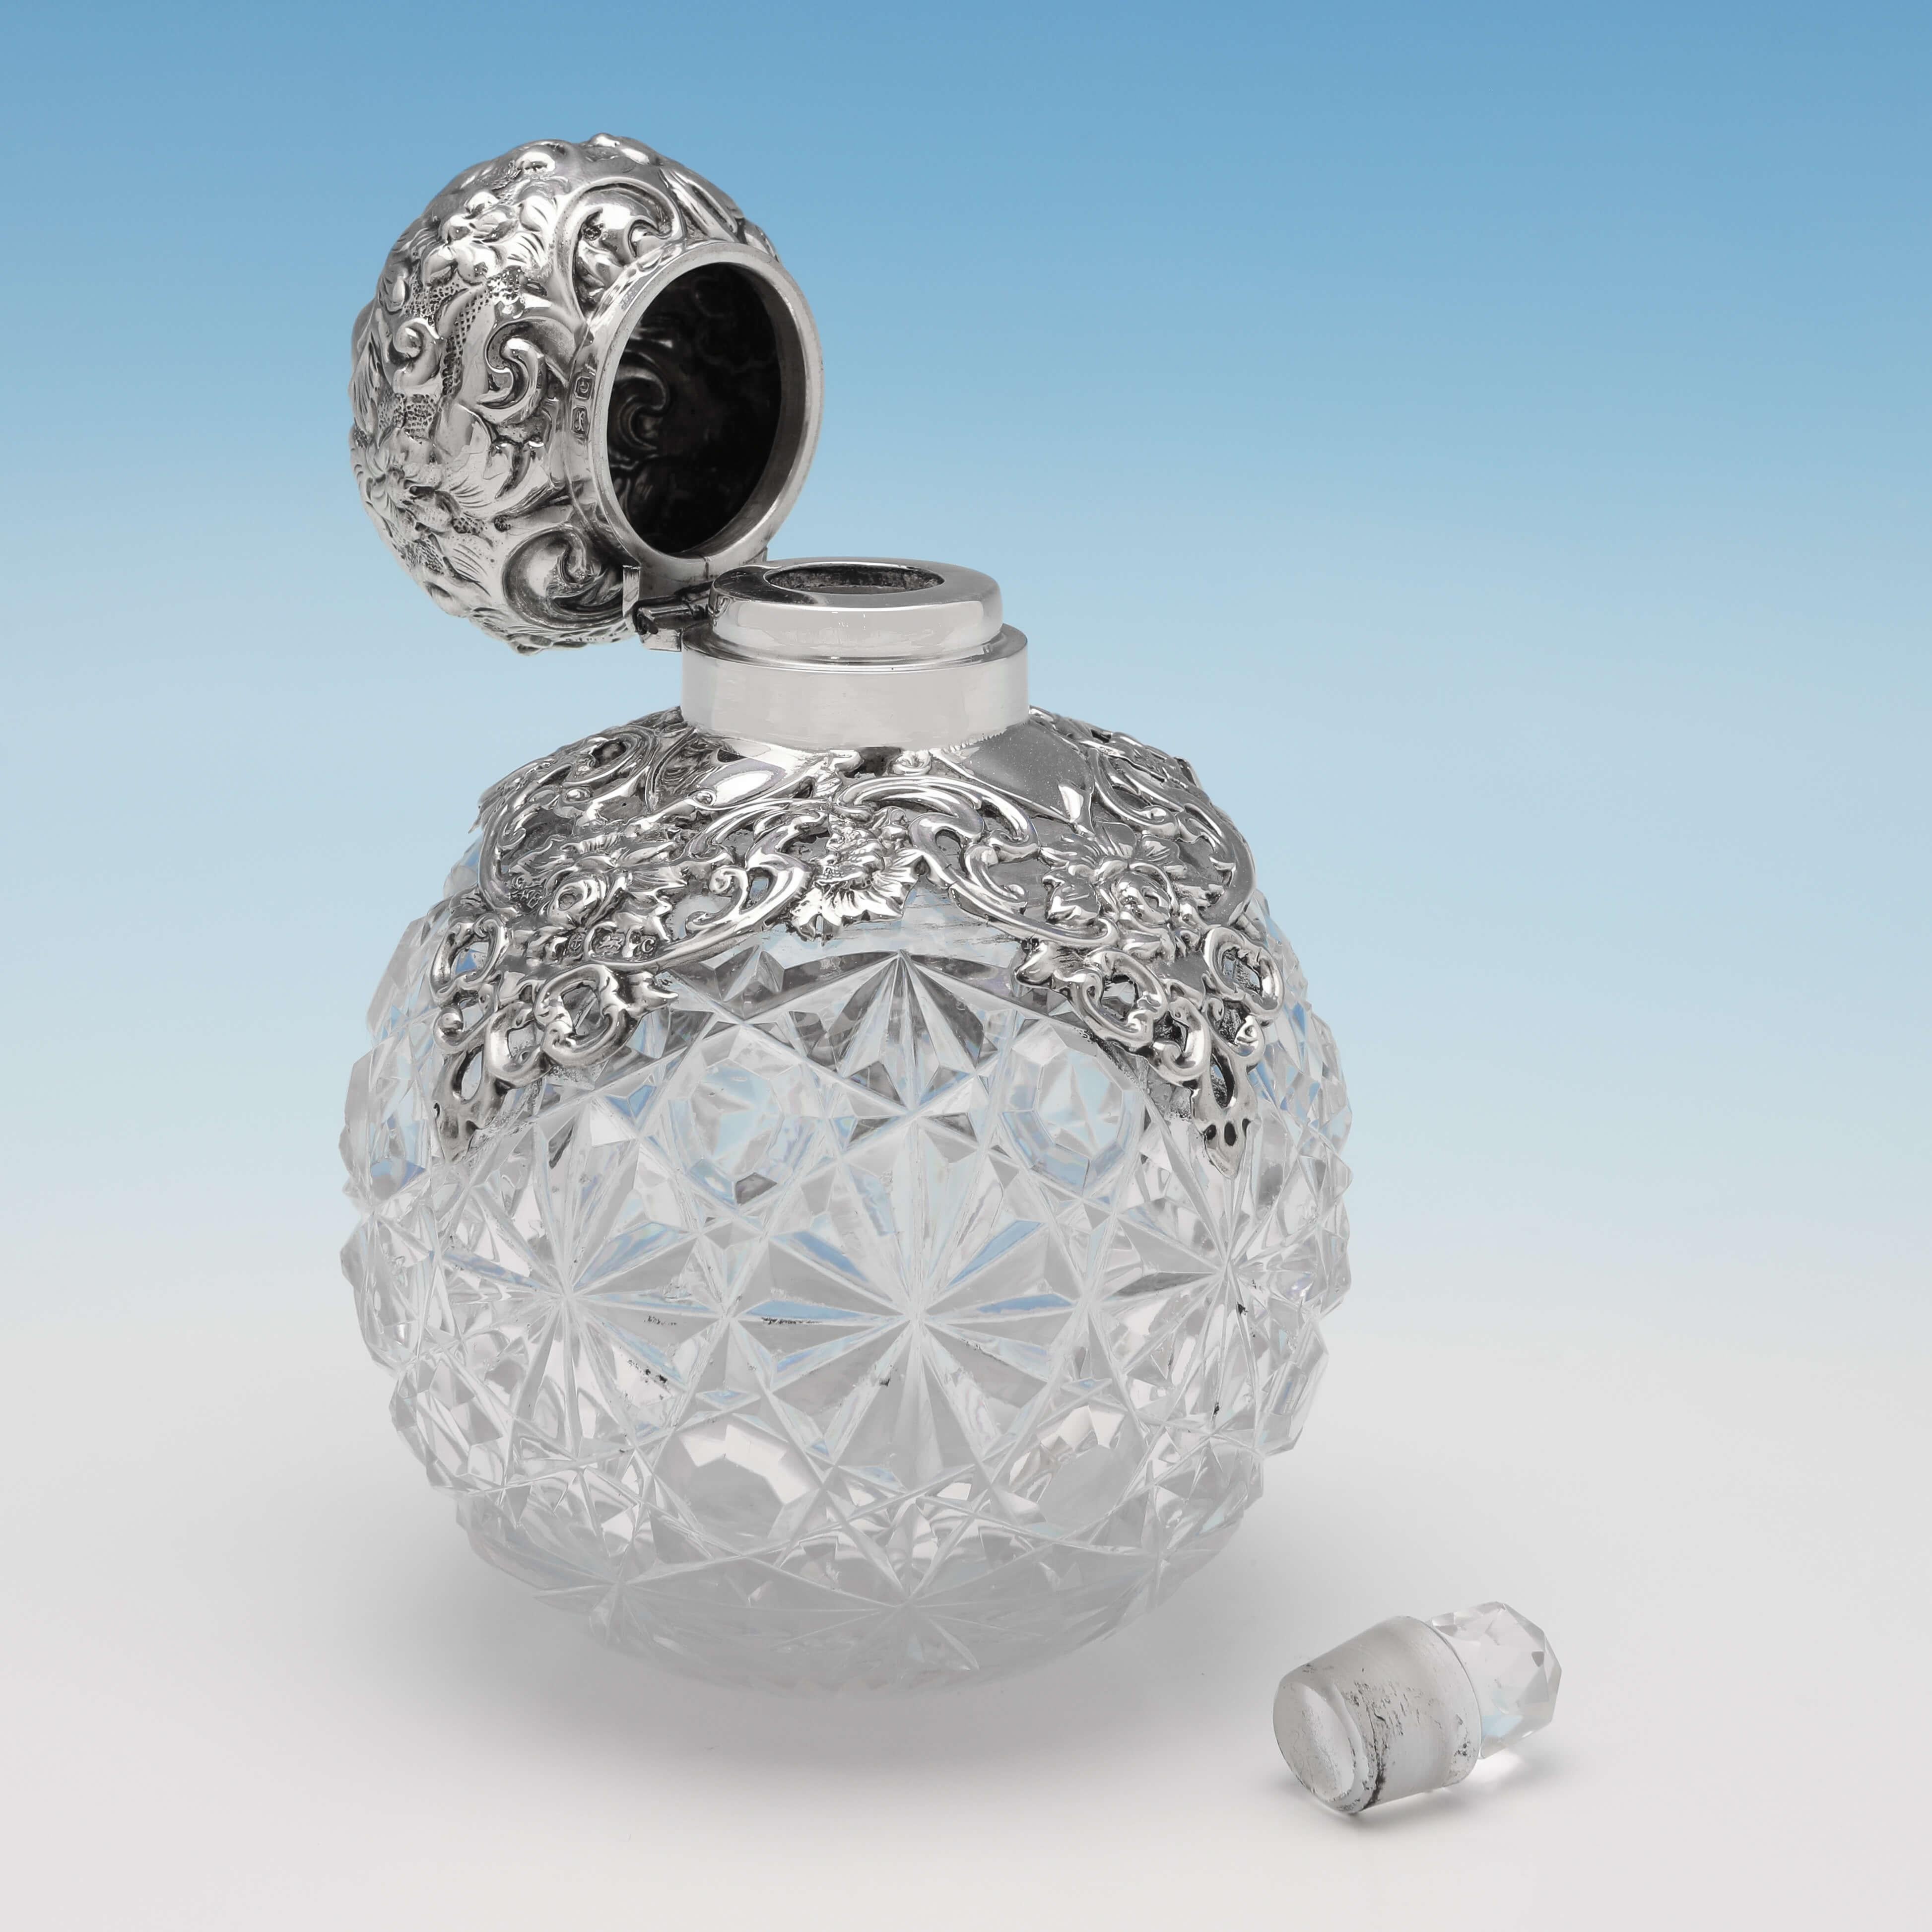 Hallmarked in Birmingham in 1902 by Synyer & Beddoes, this attractive, Antique Sterling Silver Scent Bottle, features an ornate silver lid and mount, and a cut glass body. The scent bottle measures 4.5